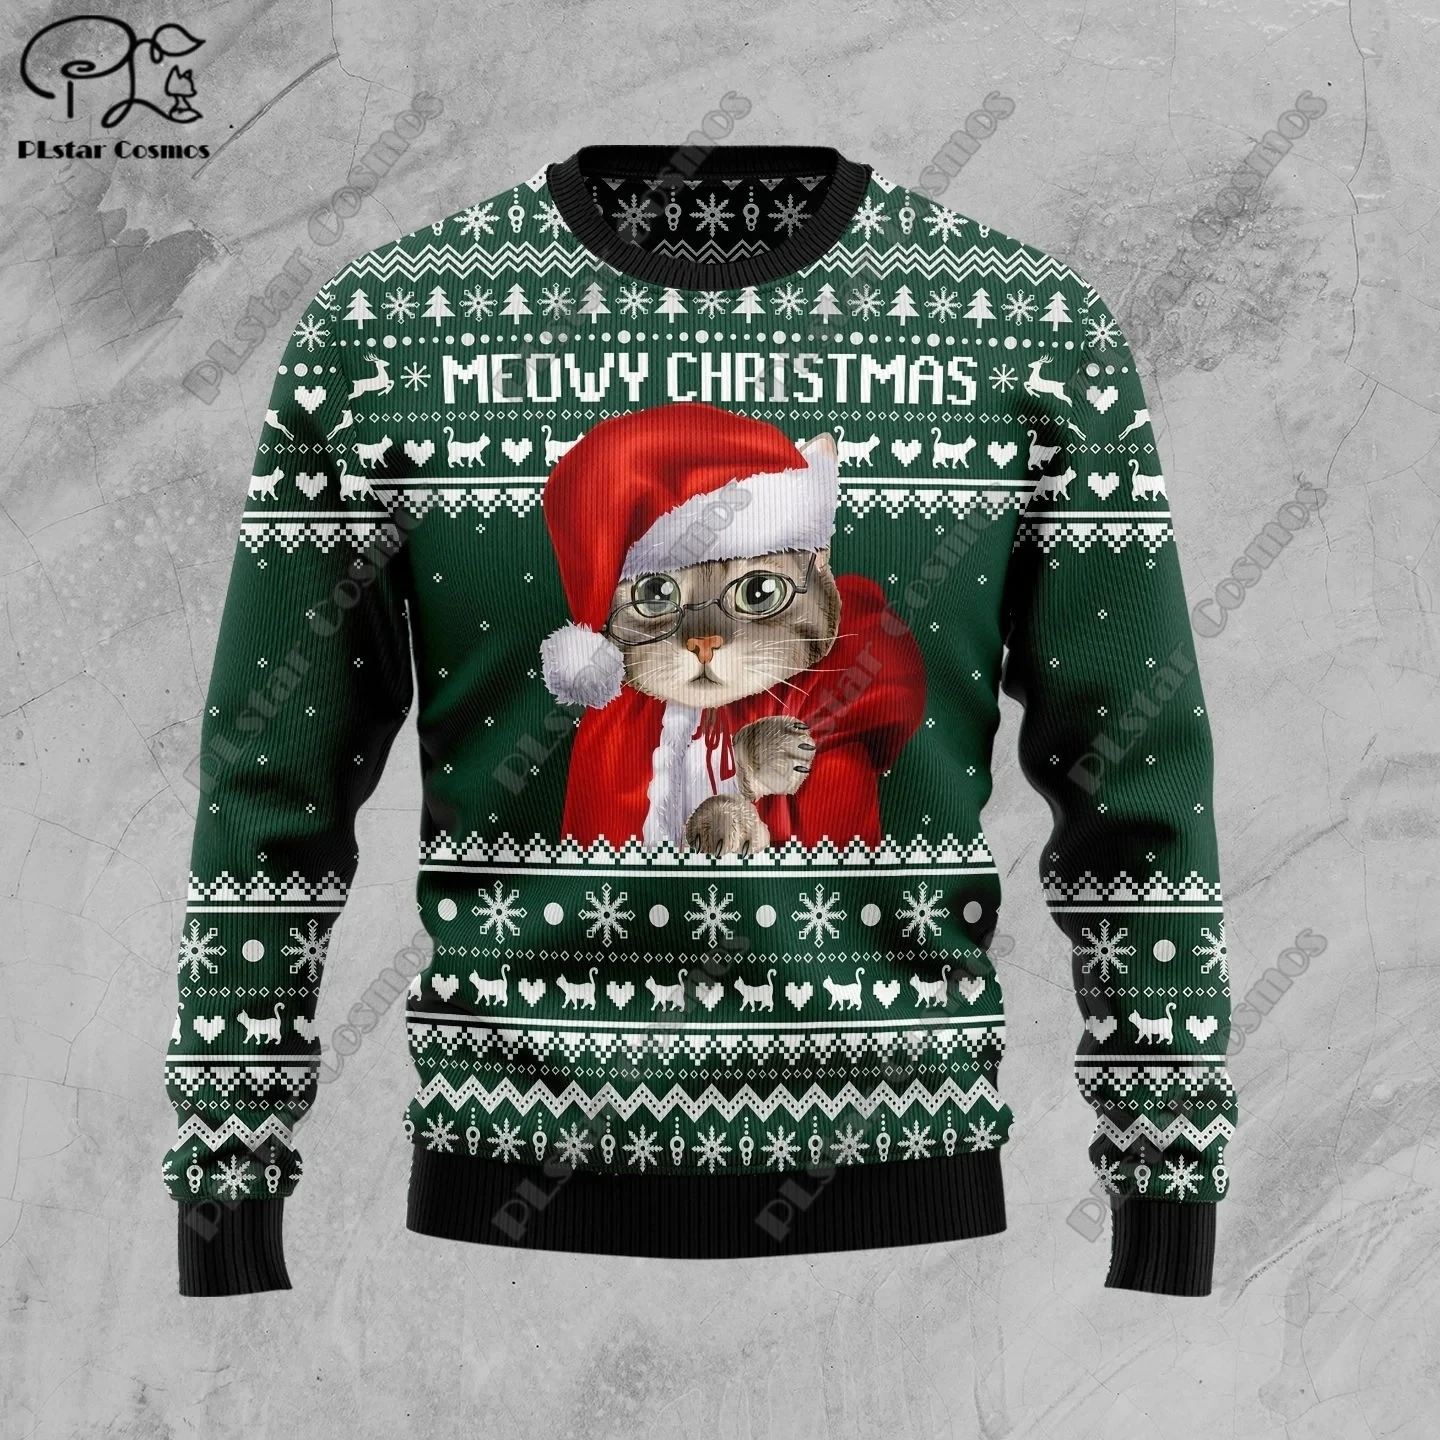 new 3d printed christmas elements christmas tree santa claus pattern art print ugly sweater street casual winter sweater s 3 New 3D printed Christmas elements Christmas tree Santa Claus pattern art print ugly sweater street casual winter sweater S-3